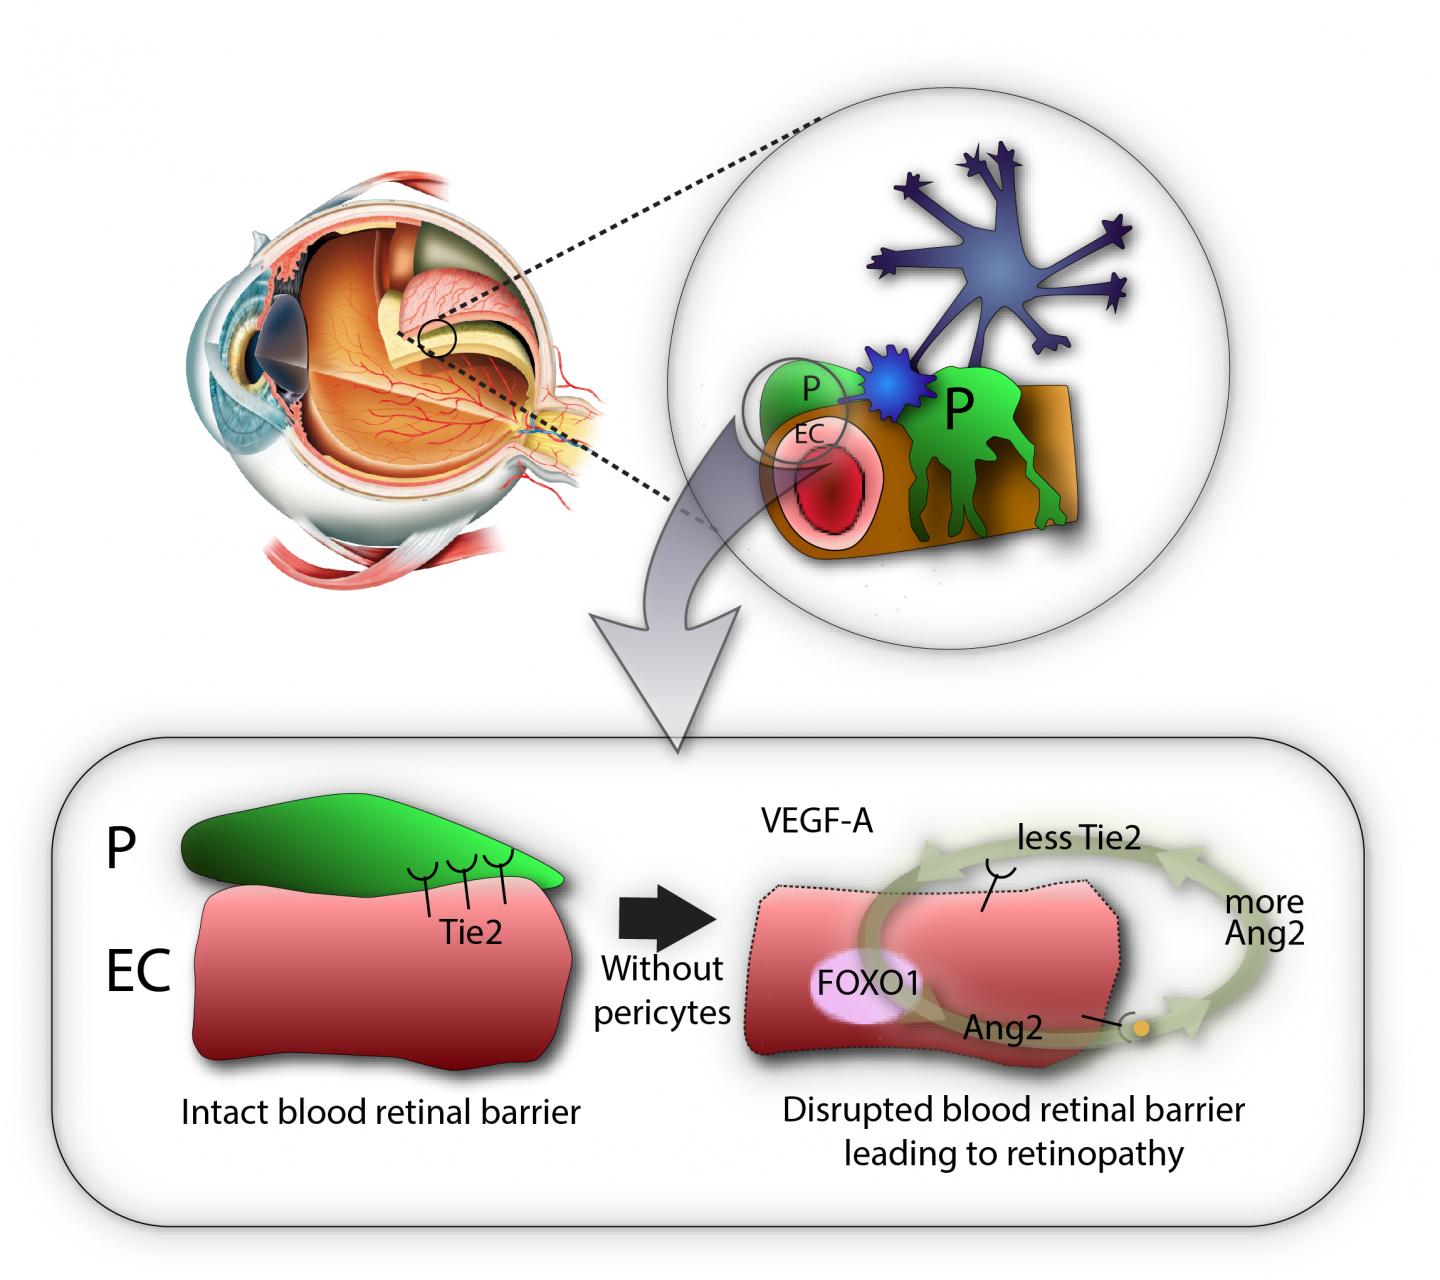 Simplified Diagram Showing the Role of Pericytes in Stabilizing the Blood-Retinal Barrier